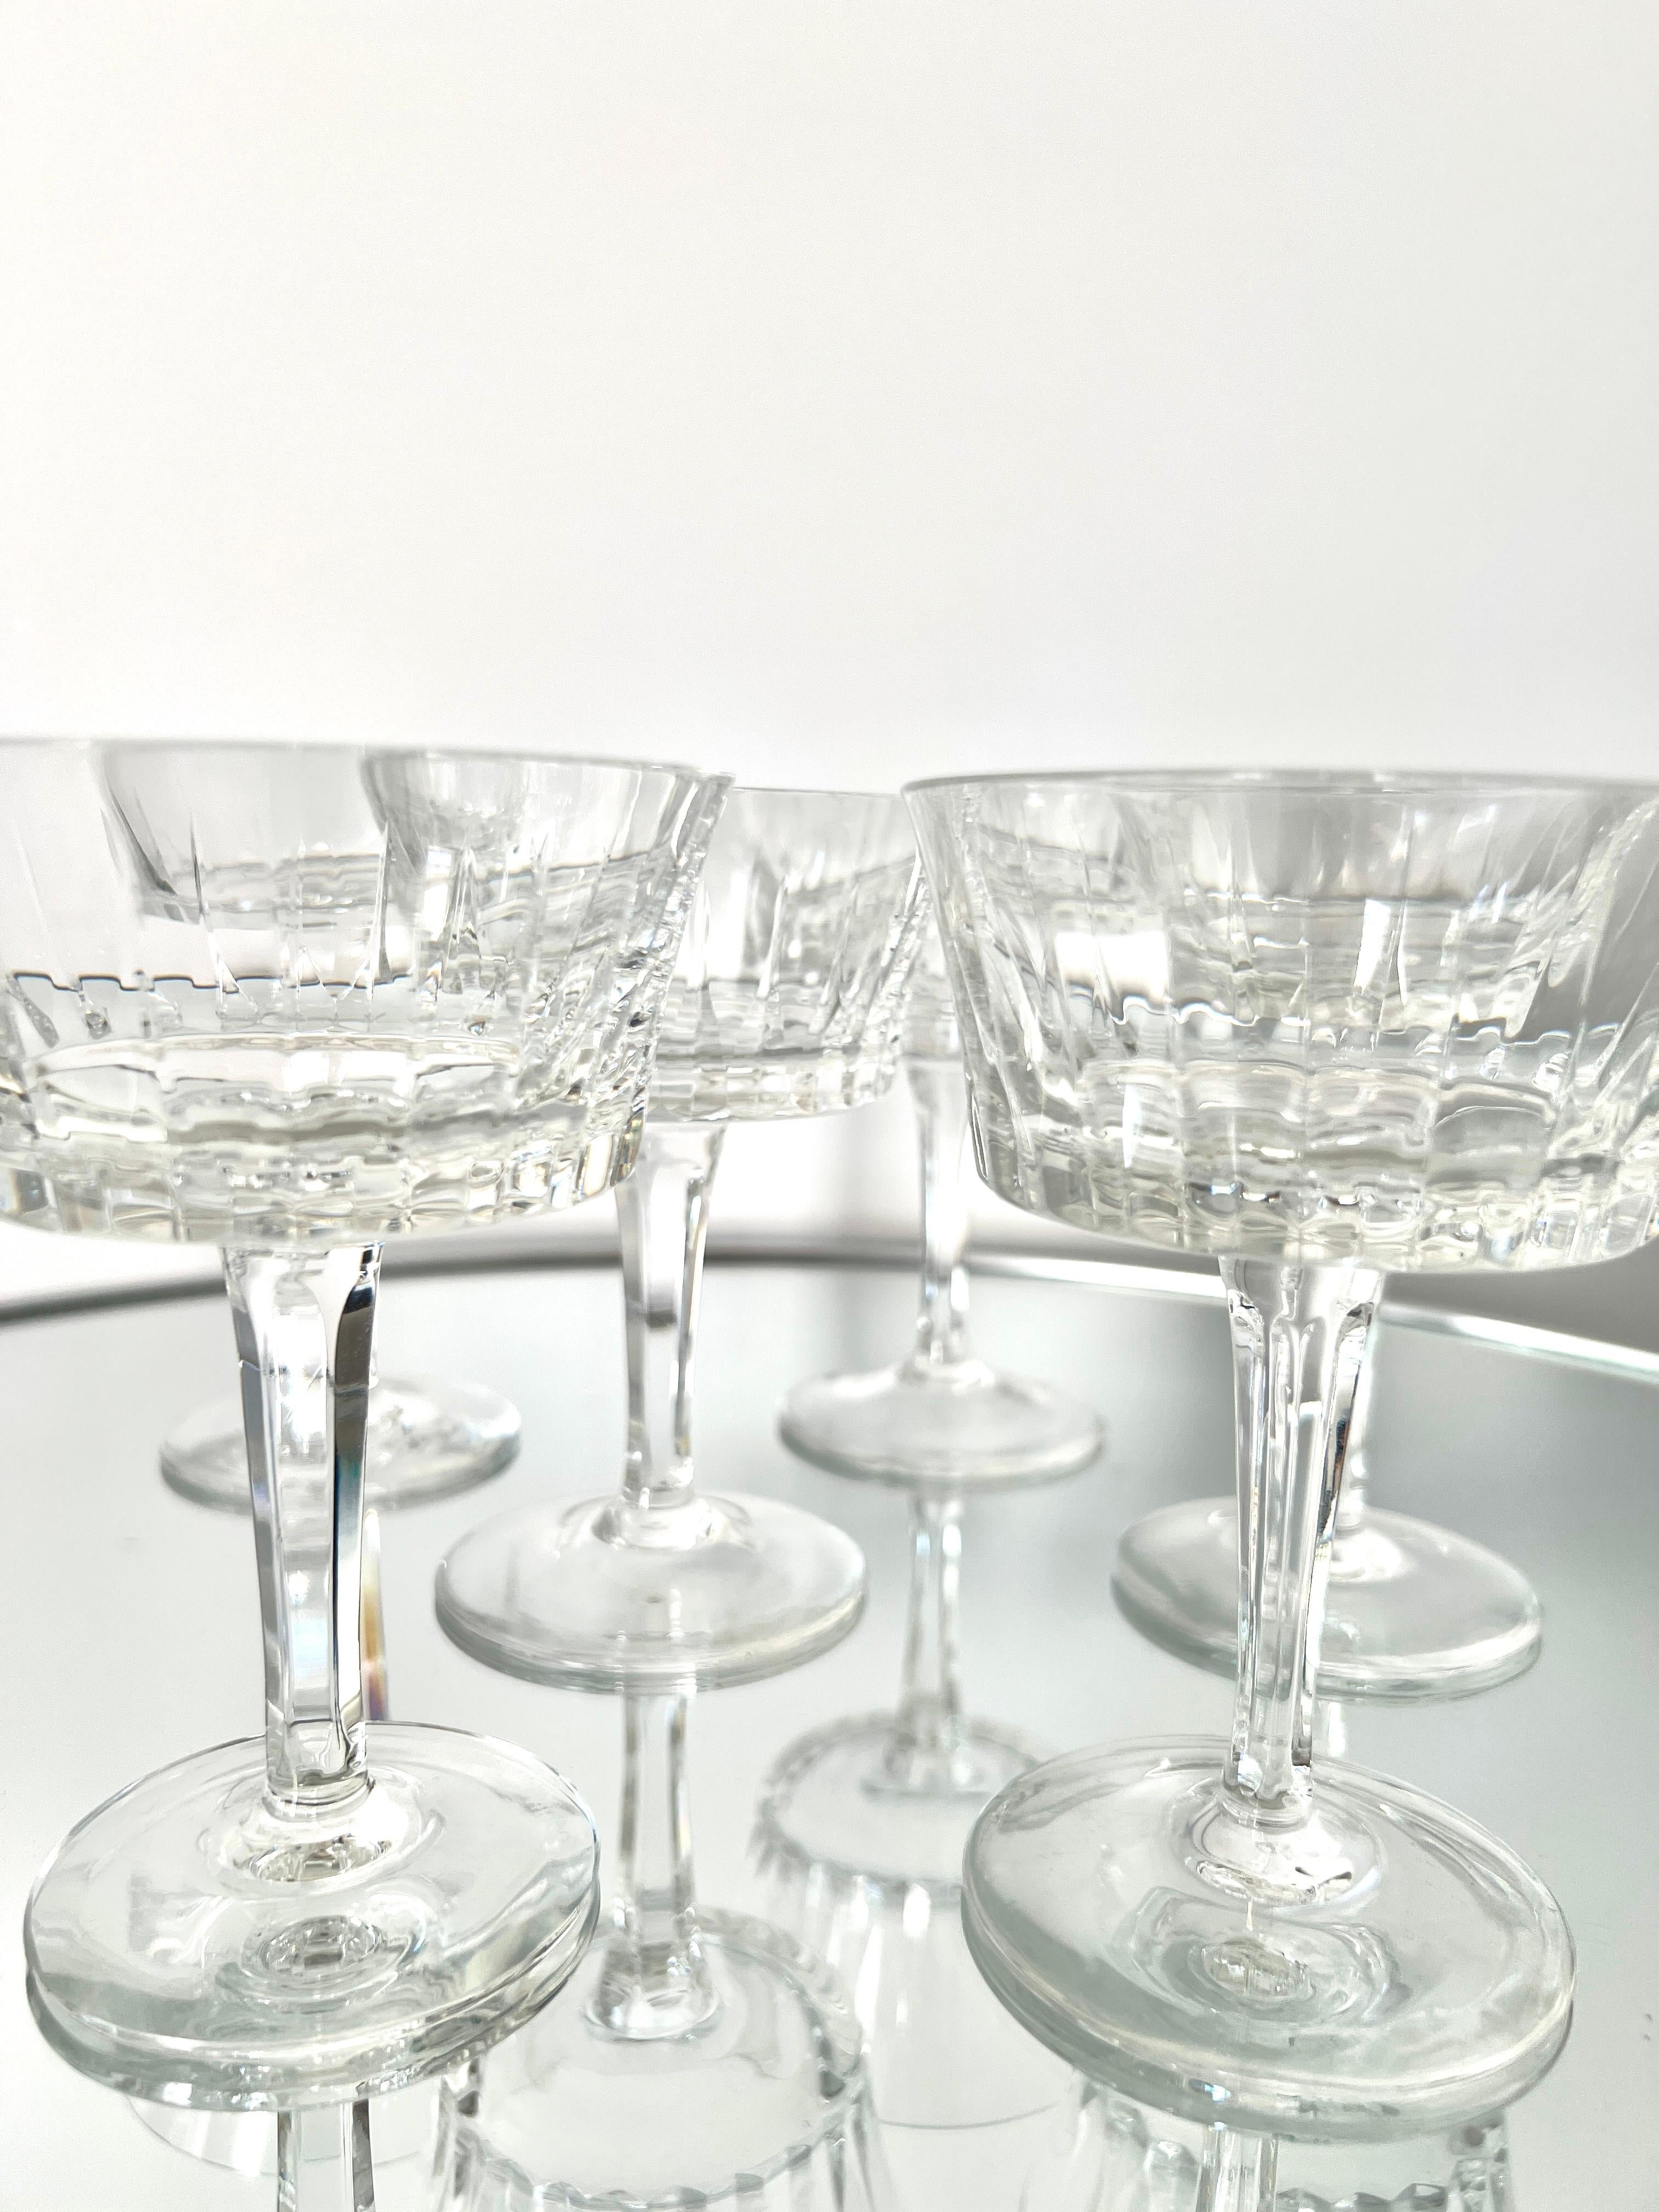 American Set of Six Vintage Crystal Champagne Coupes by Gorham, c. 1970's For Sale